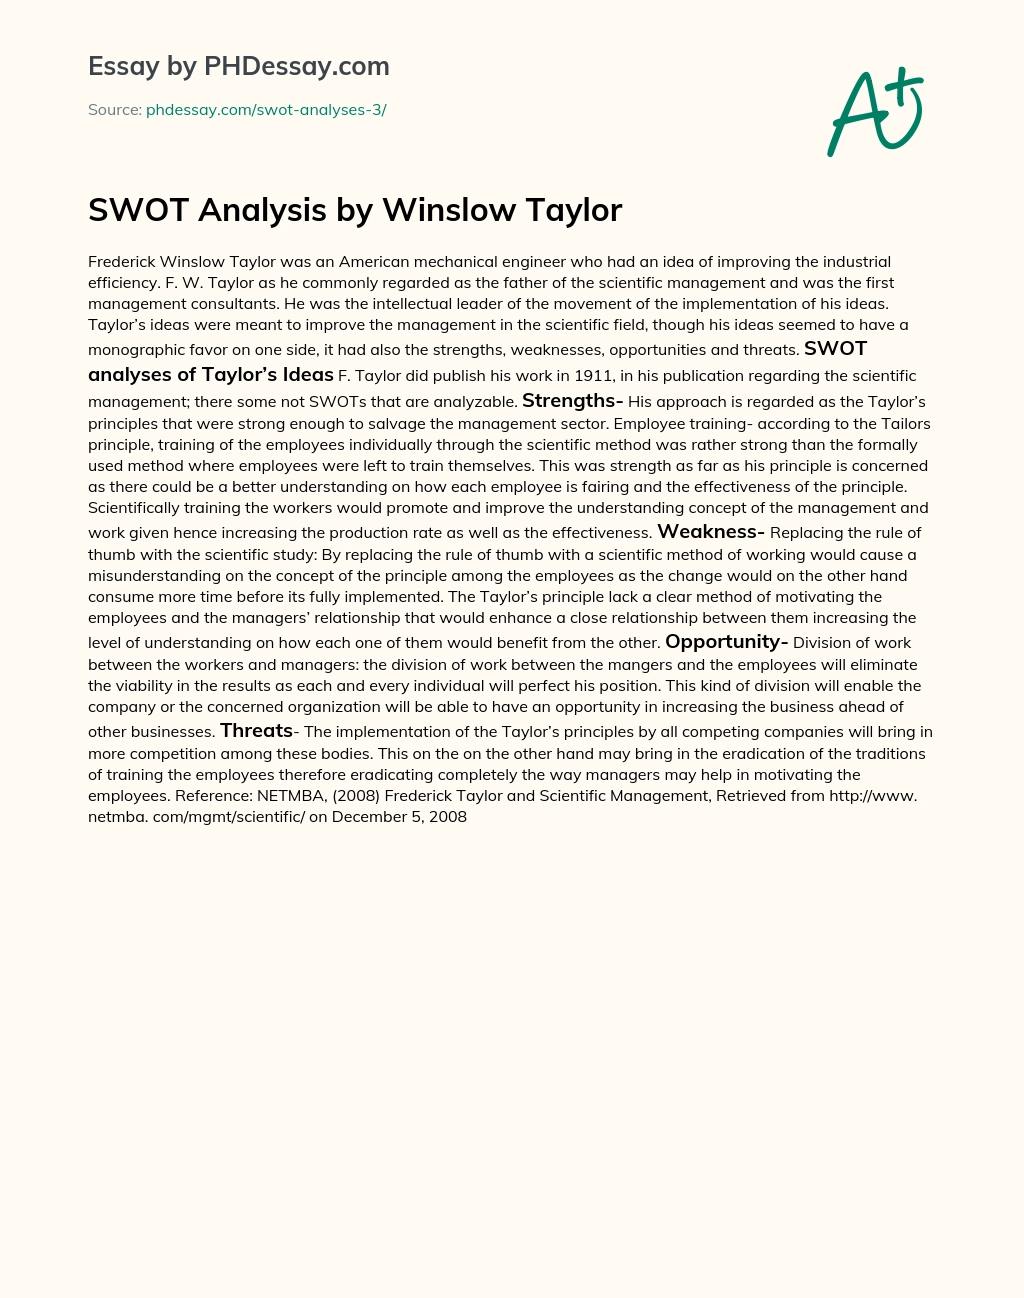 SWOT Analysis by Winslow Taylor essay